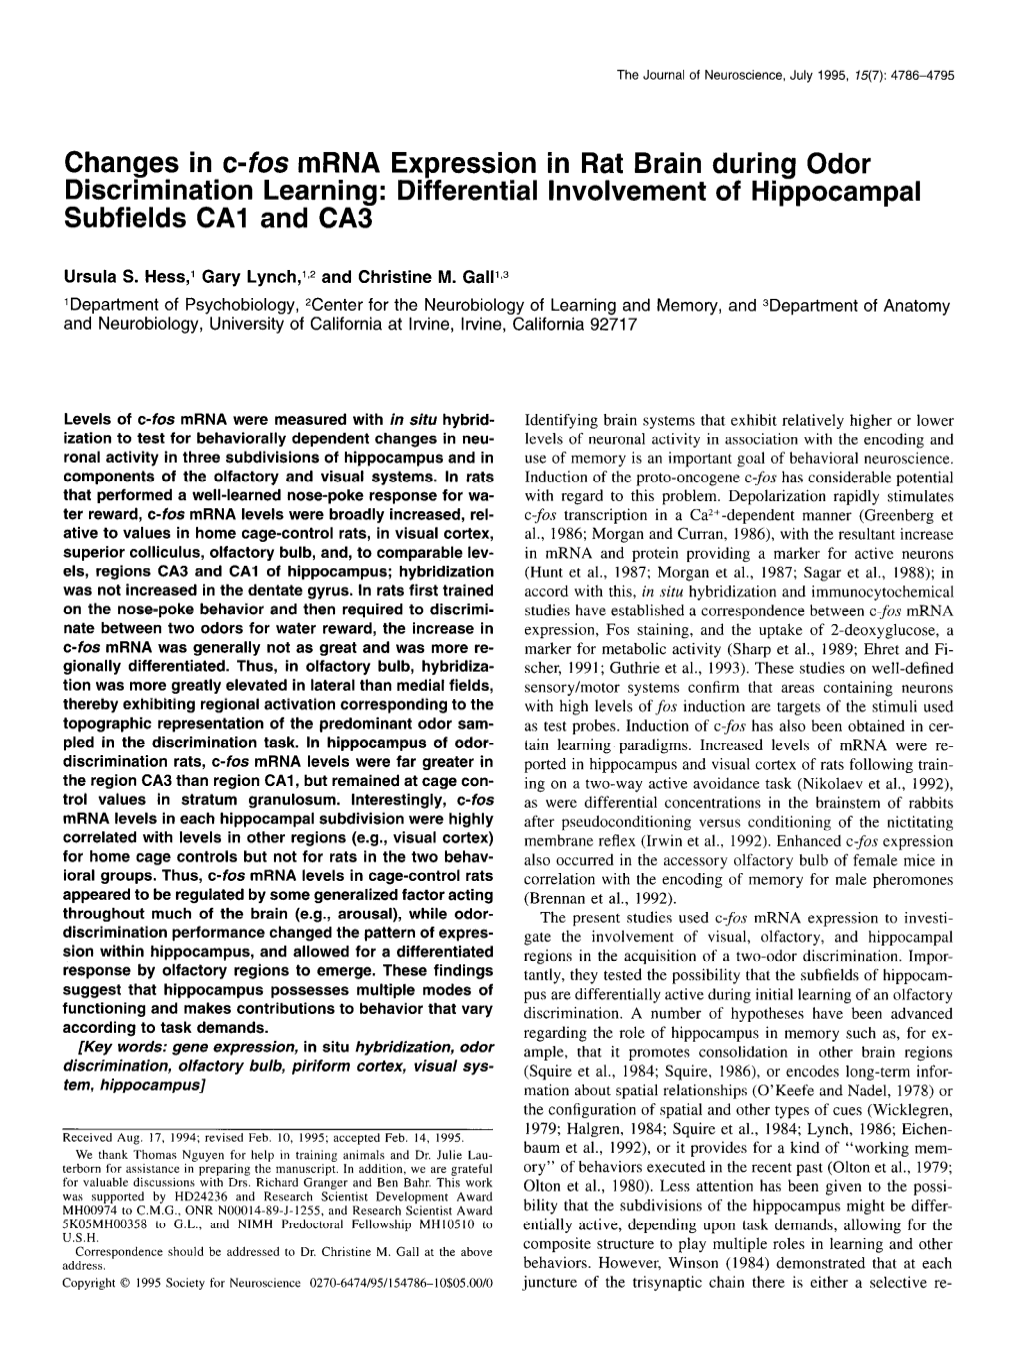 Changes in C-Fos Mrna Expression in Rat Brain During Odor Discrimination Learning: Differential Involvement of Hippocampal Subfields CA1 and CA3